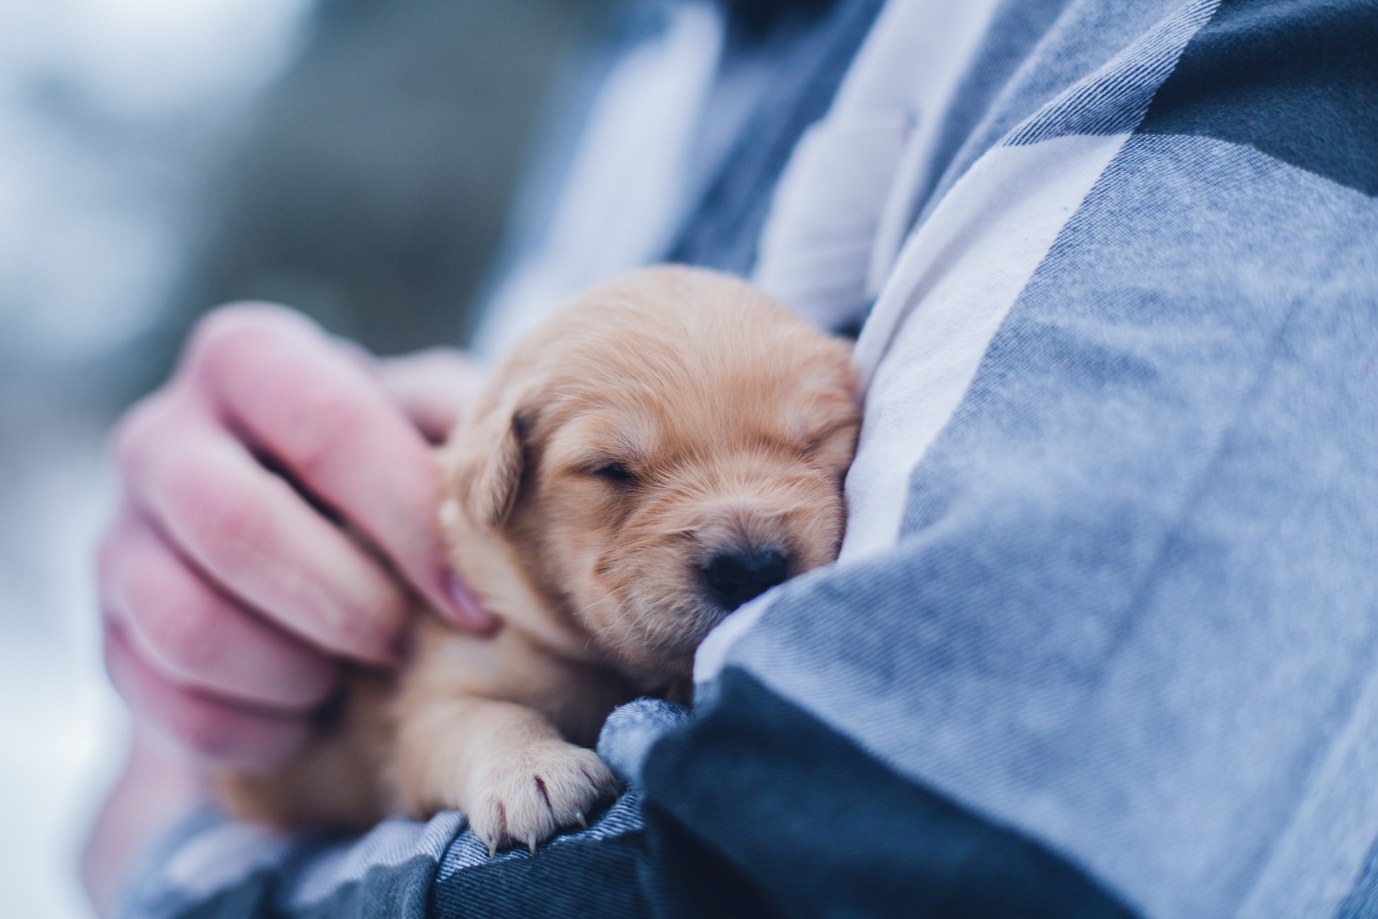 A dog sleeping on a person's lap

Description automatically generated with medium confidence